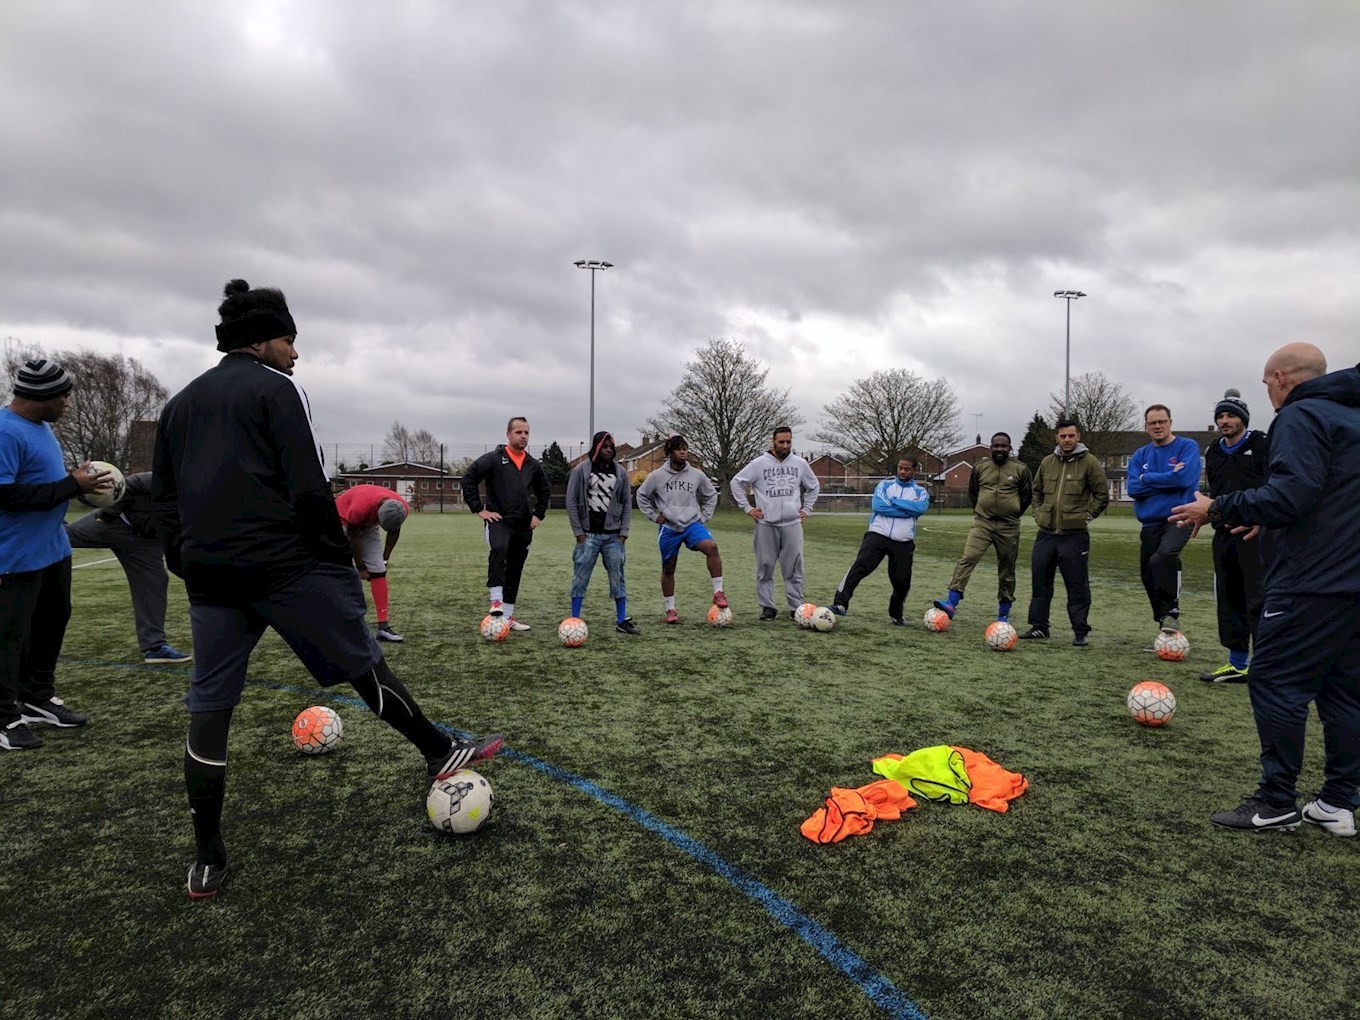 What is the FA Level 1 Course? FA Level 1 in Coaching Football